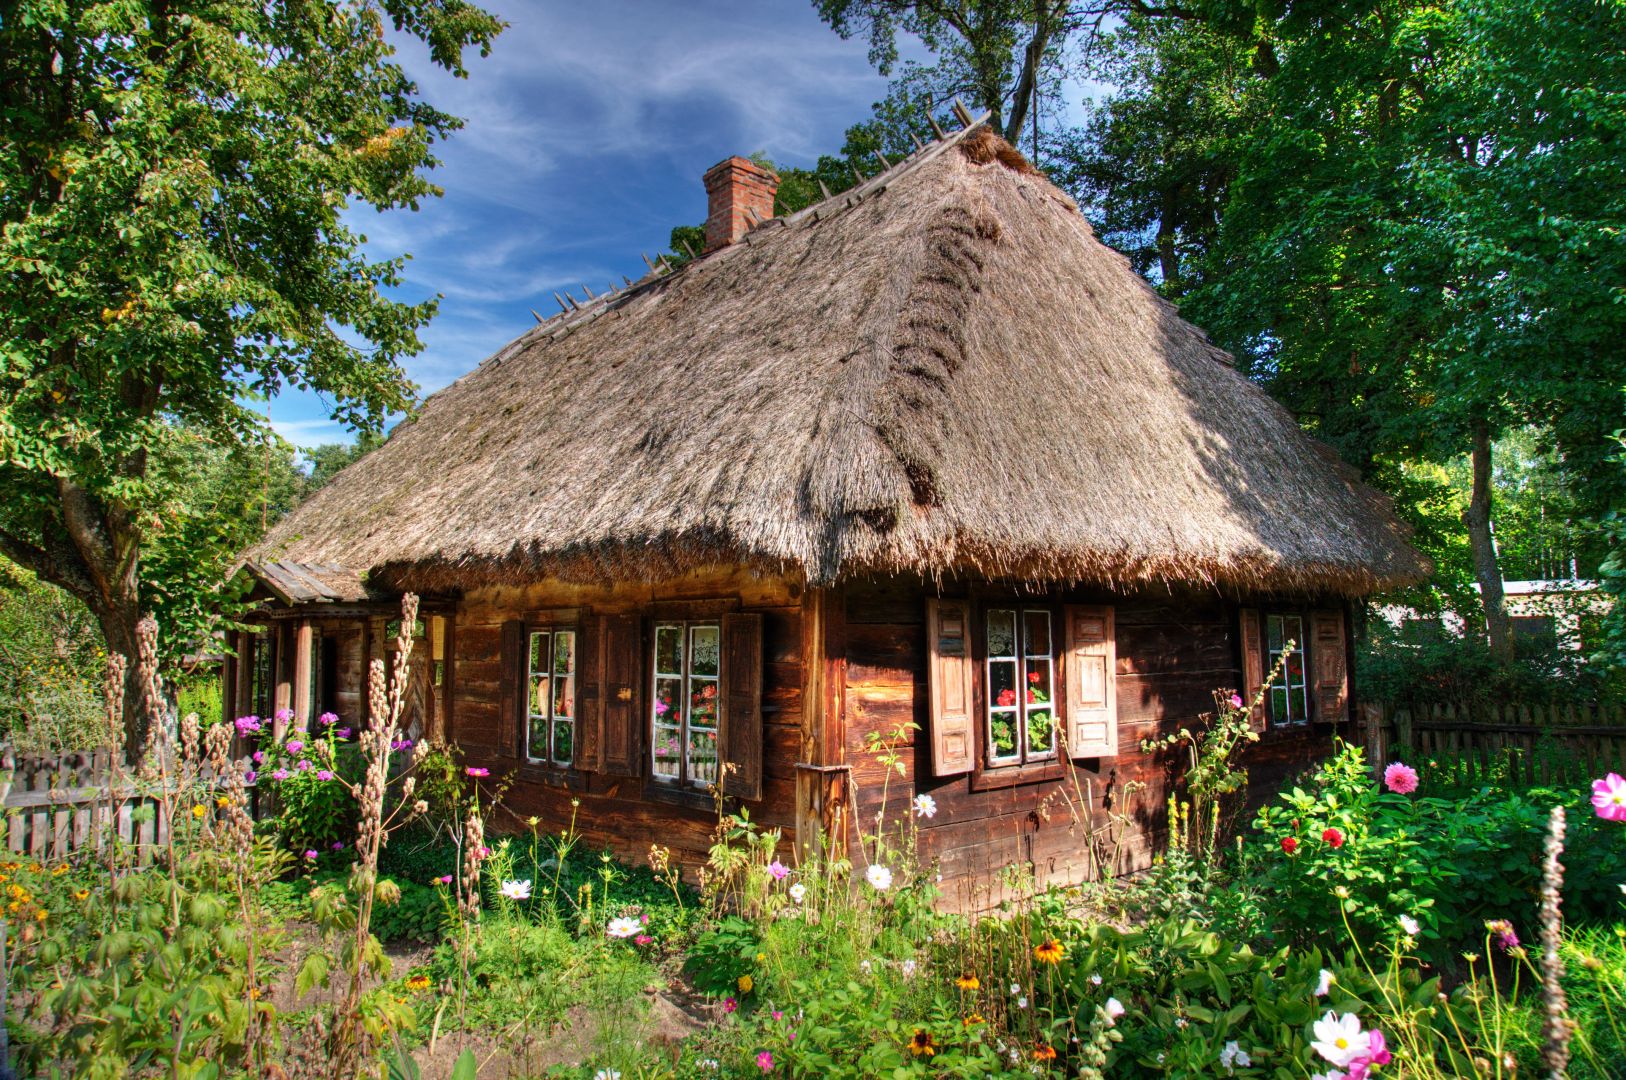 Cottage Museum of Agriculture in Ciechanowiec